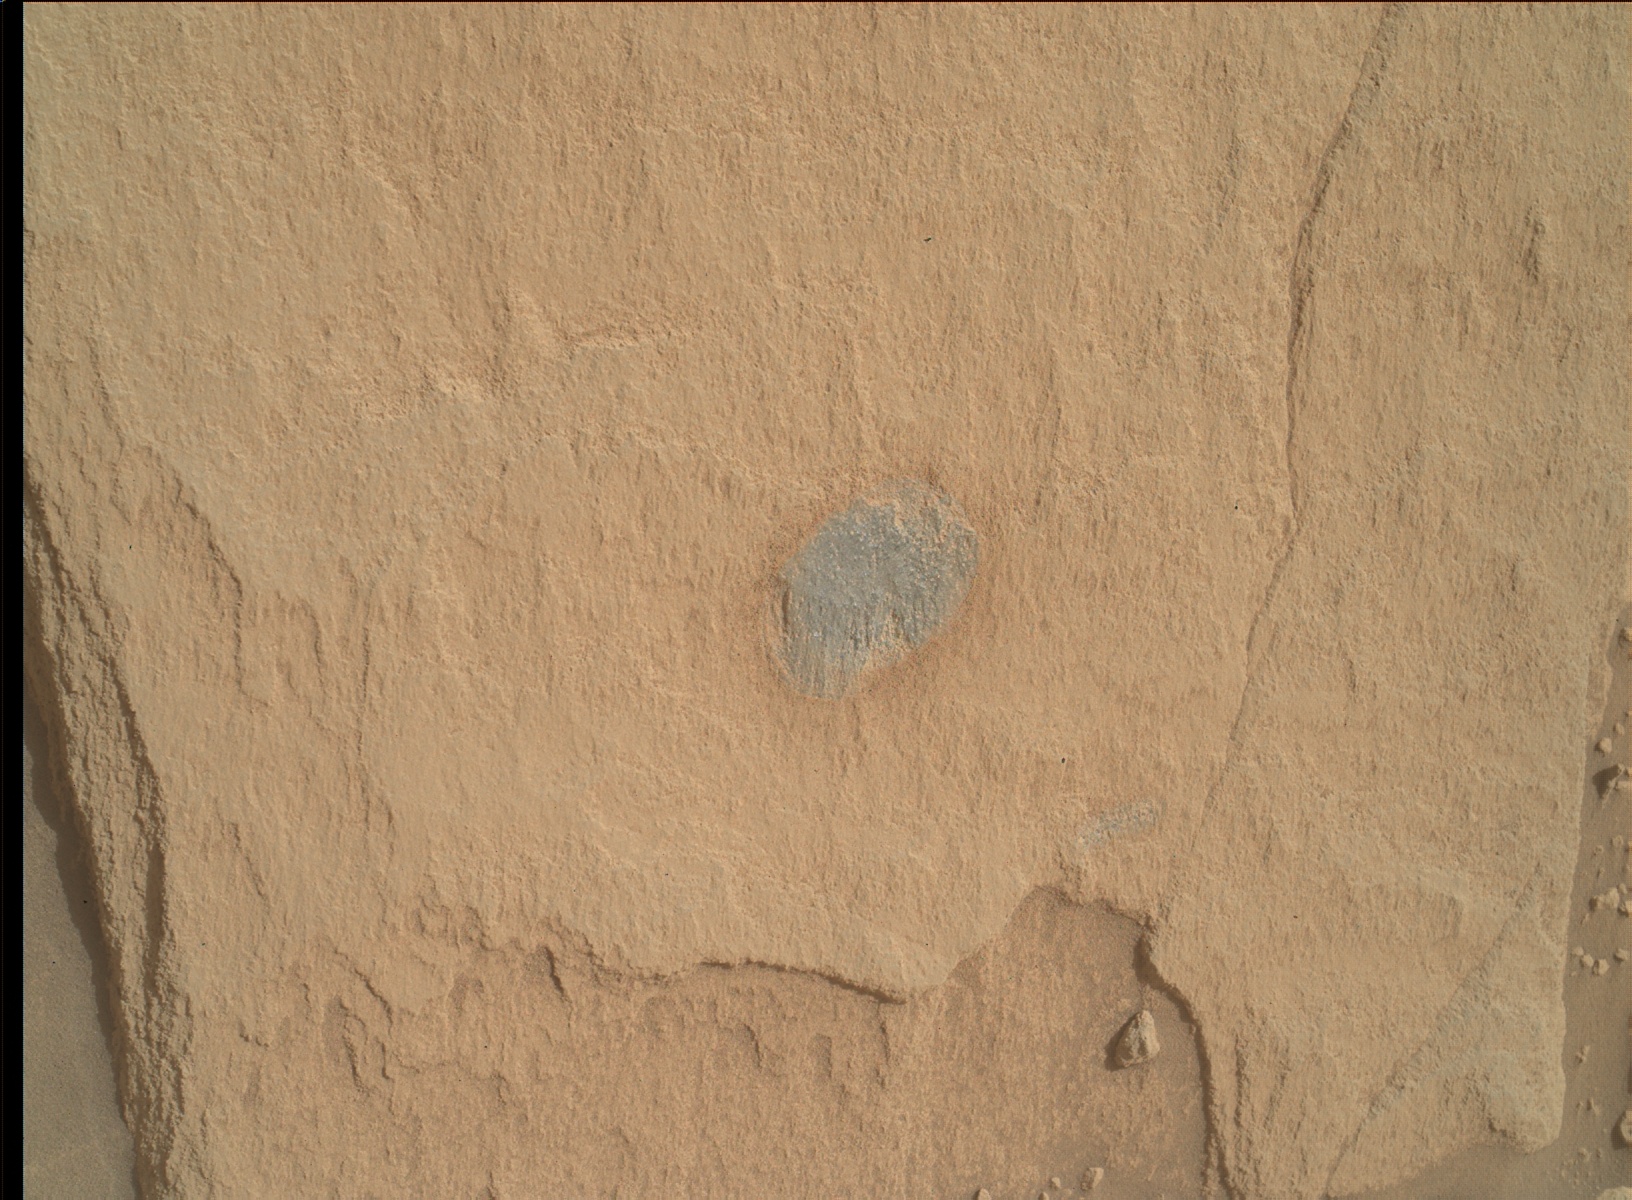 Nasa's Mars rover Curiosity acquired this image using its Mars Hand Lens Imager (MAHLI) on Sol 2704